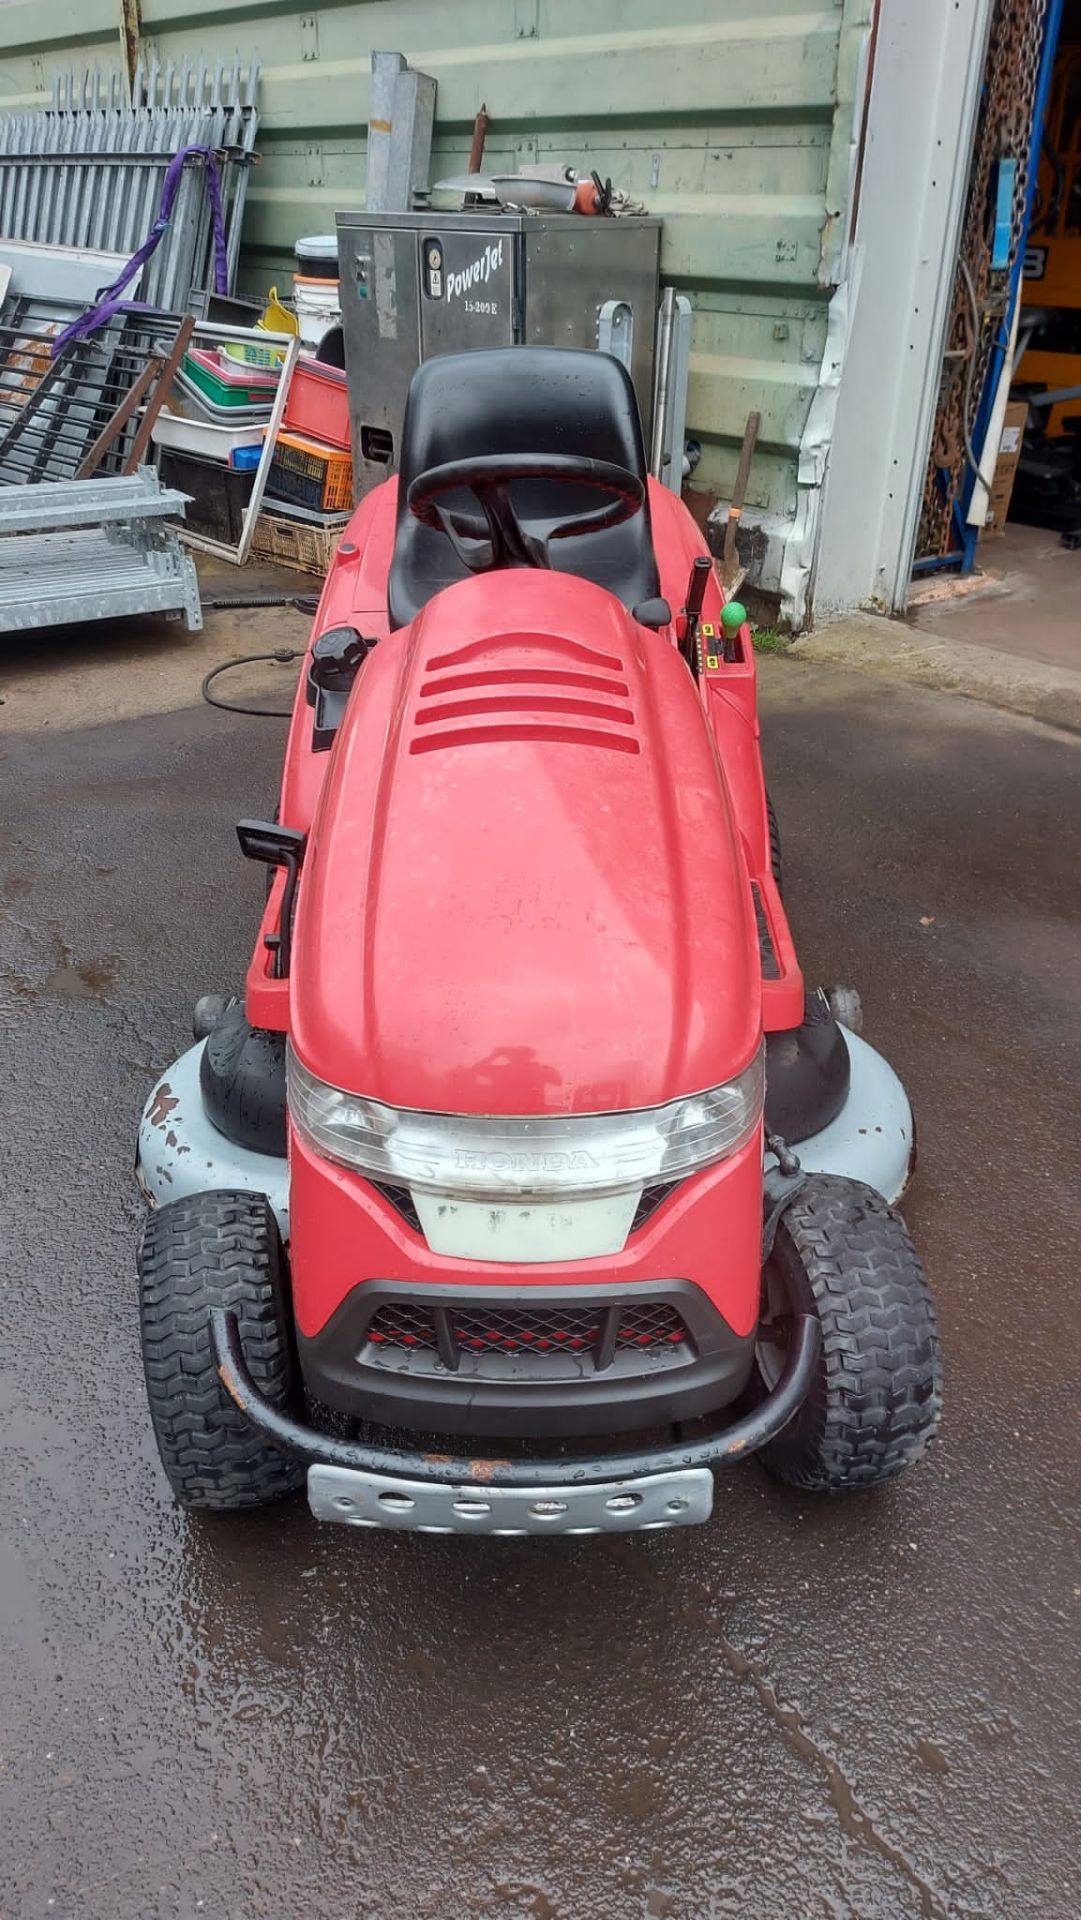 HONDA HF 2622 RIDE ON LAWN MOWER, WITH BOTH REAR DISCHARGE AND MULCHING BY MOVING LEVER *PLUS VAT* - Image 2 of 8